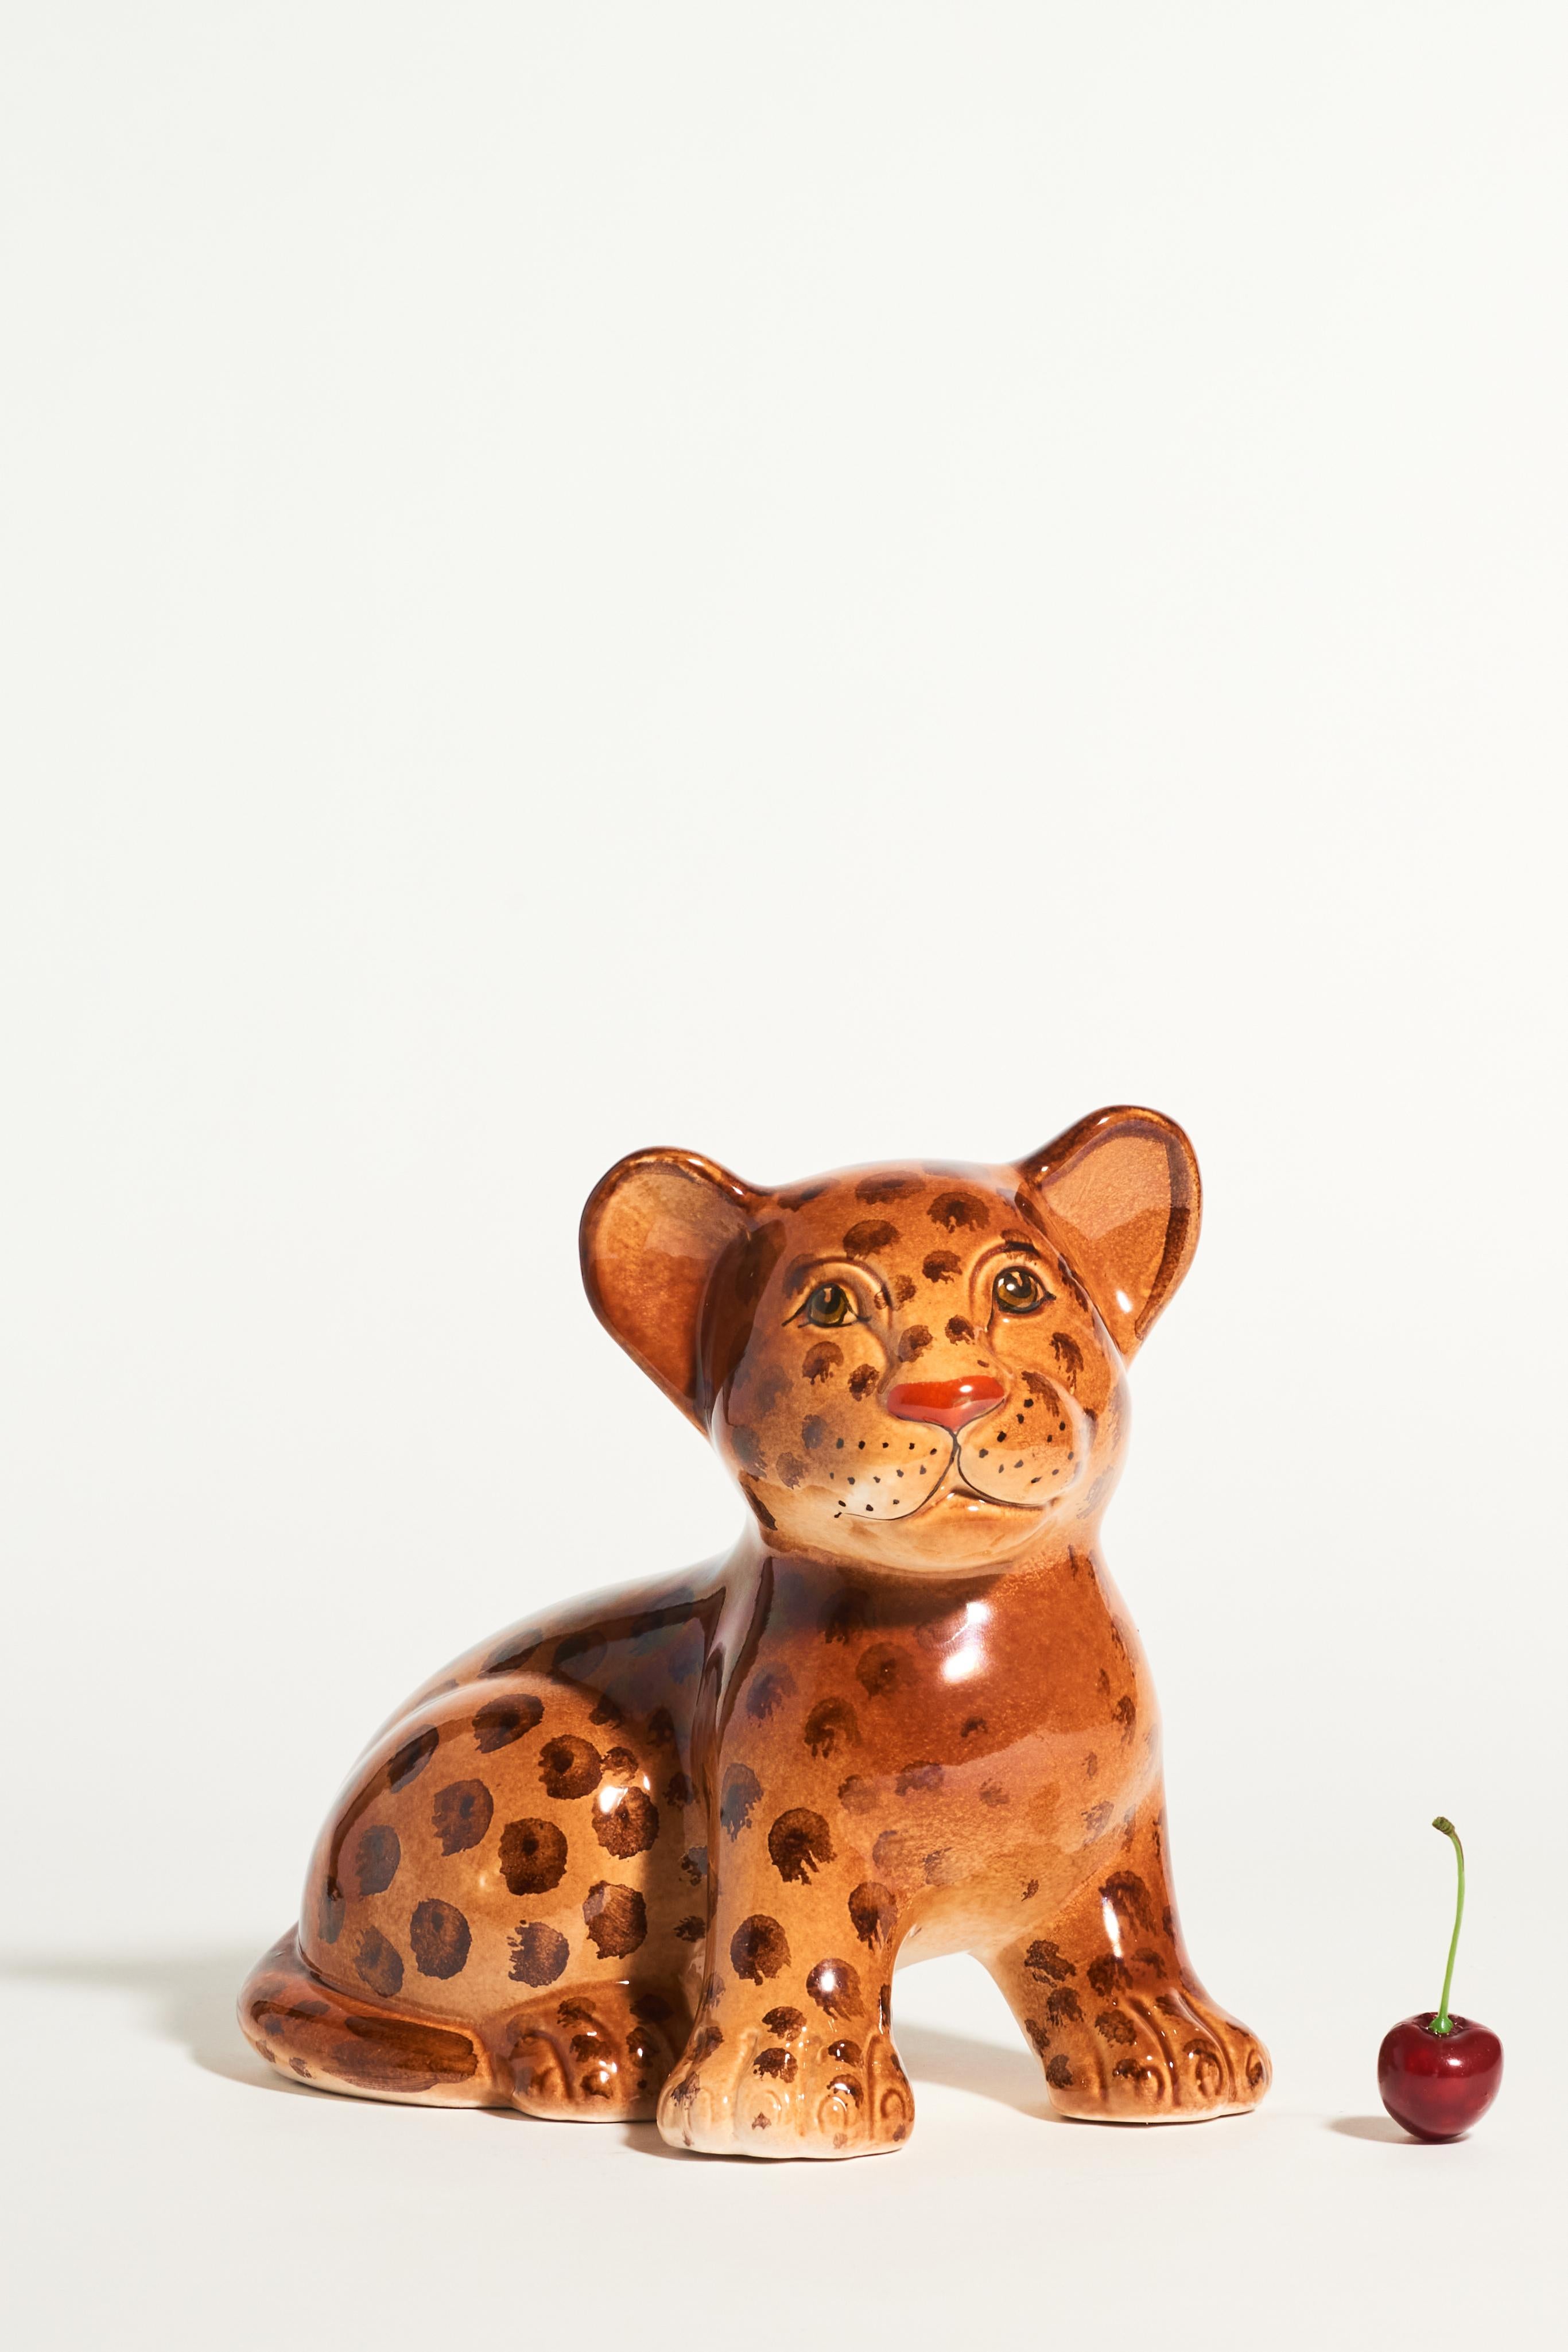 Italian ceramic hand painted leopard cub with sweet expressive face and lovely warm glazed colors.